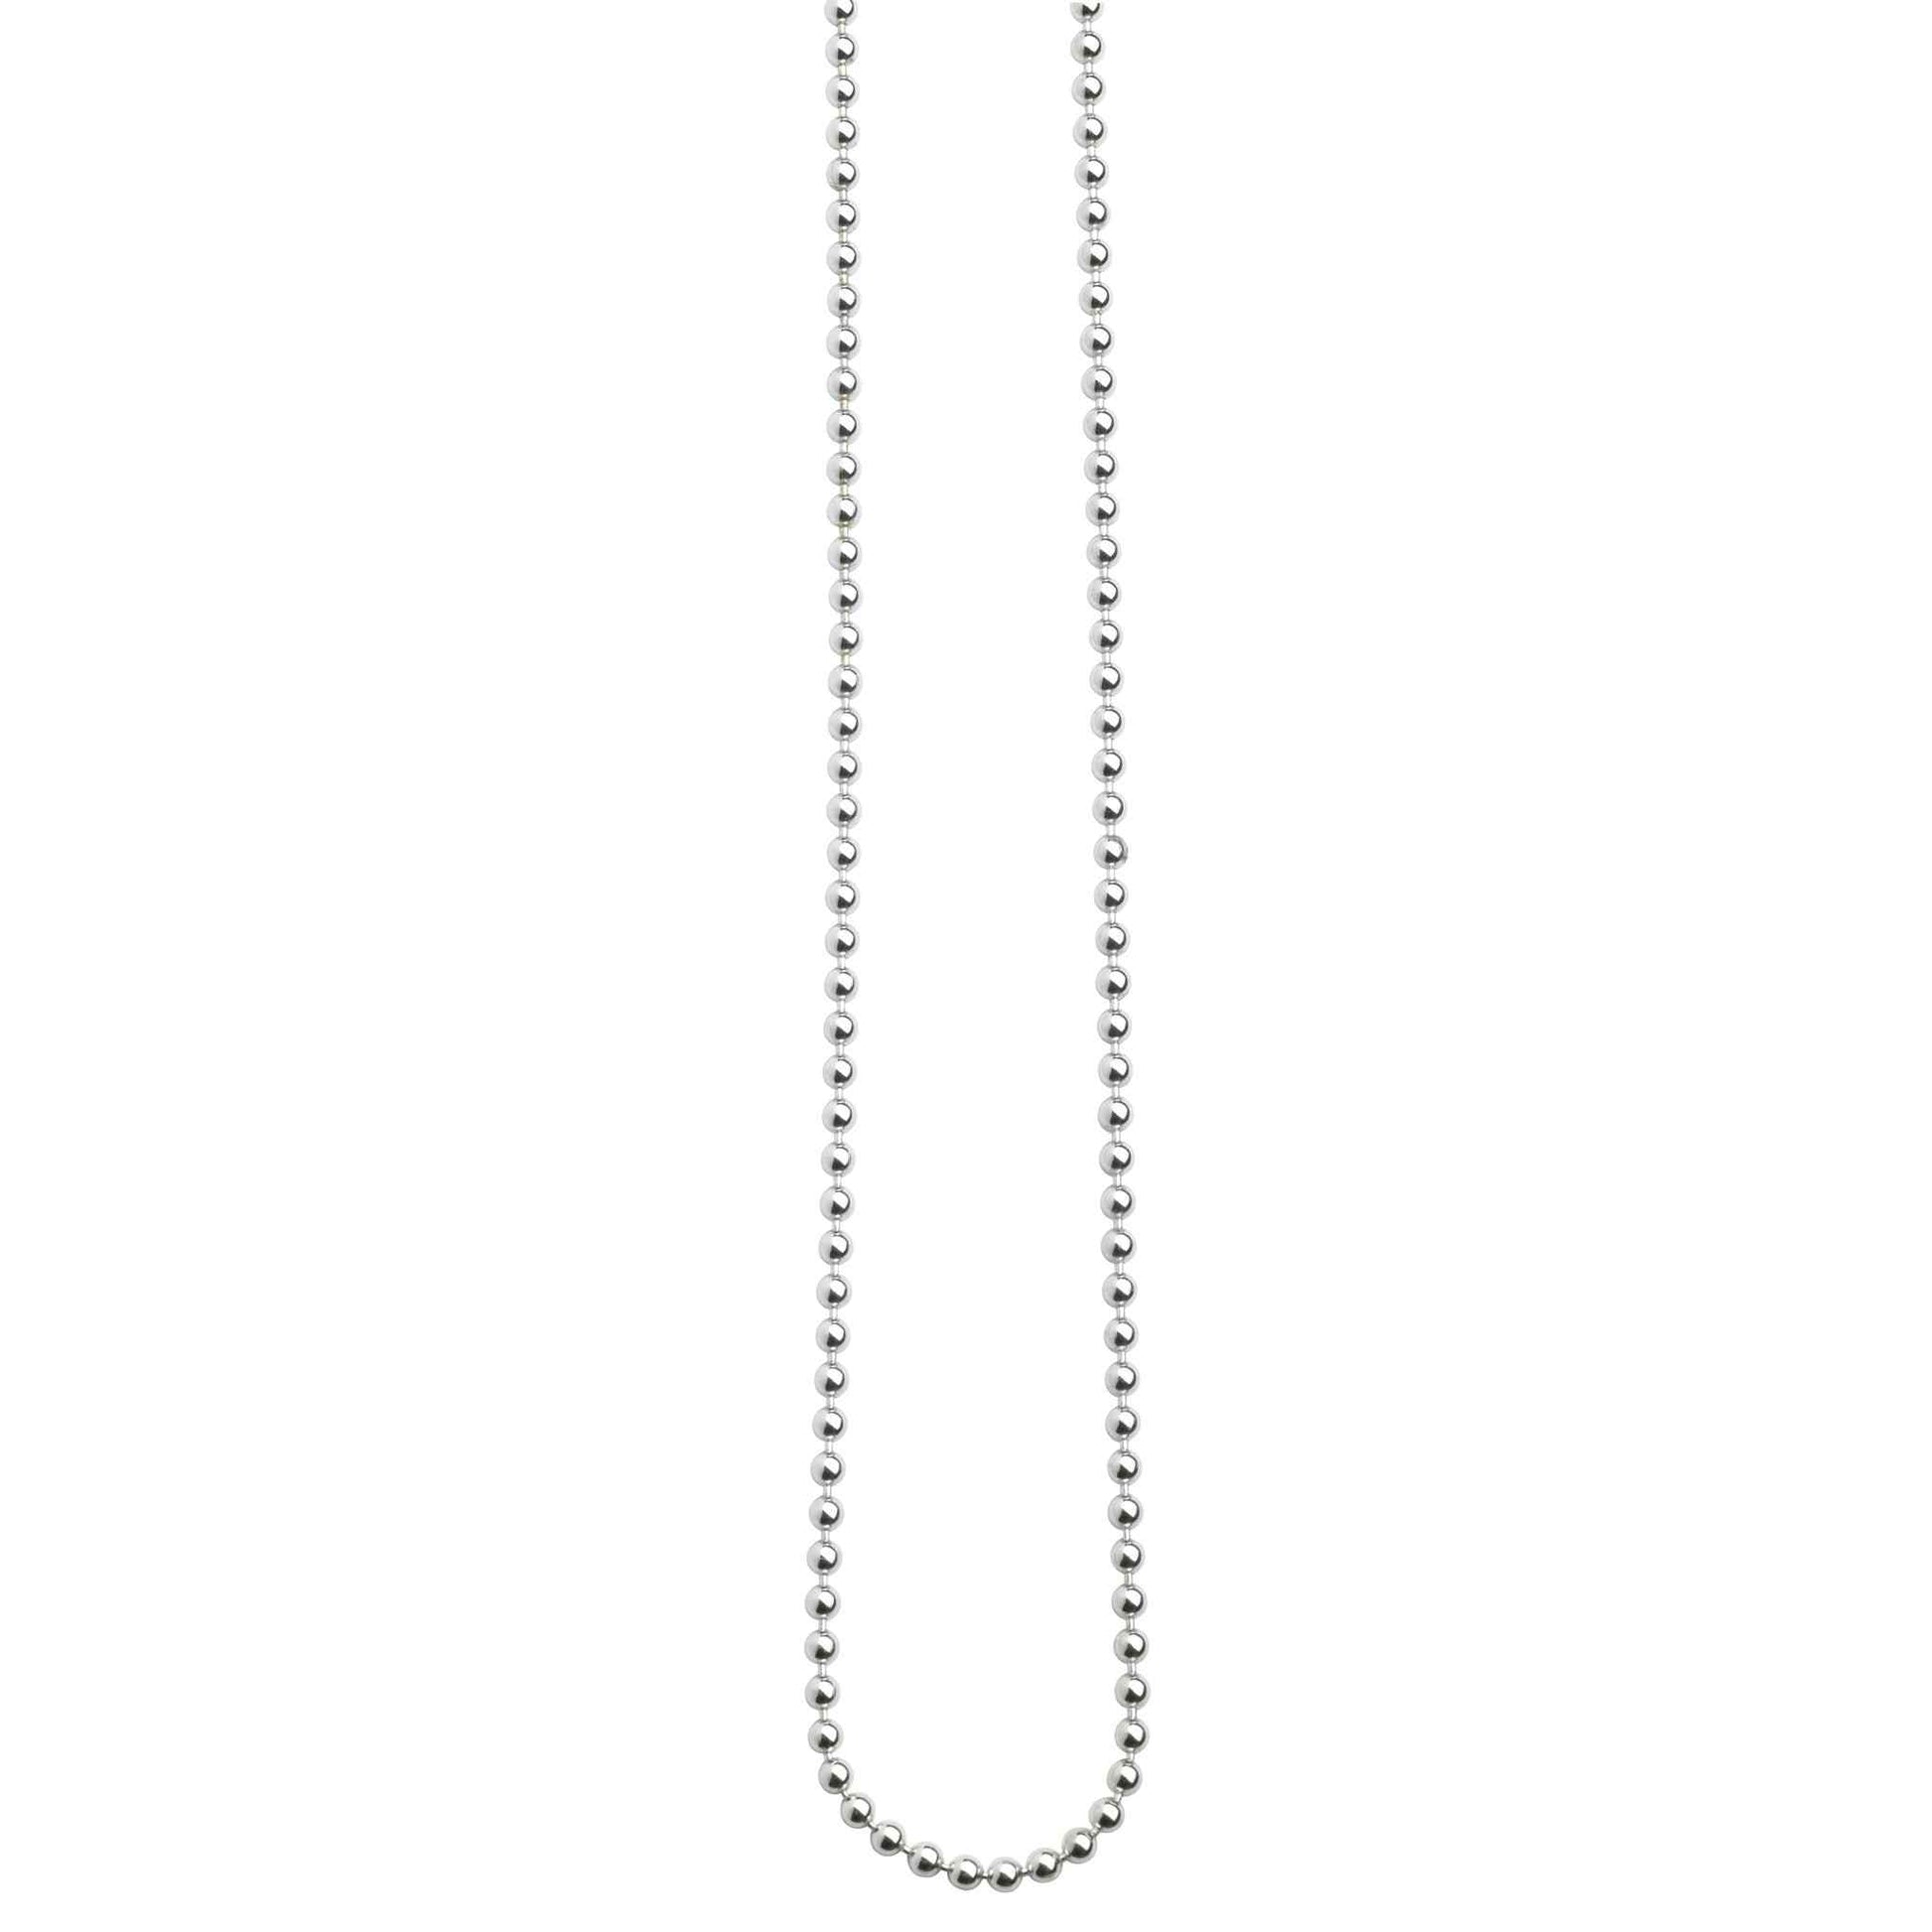 A 1.8 mm sterling silver 16" bead chain displayed on a neutral white background.